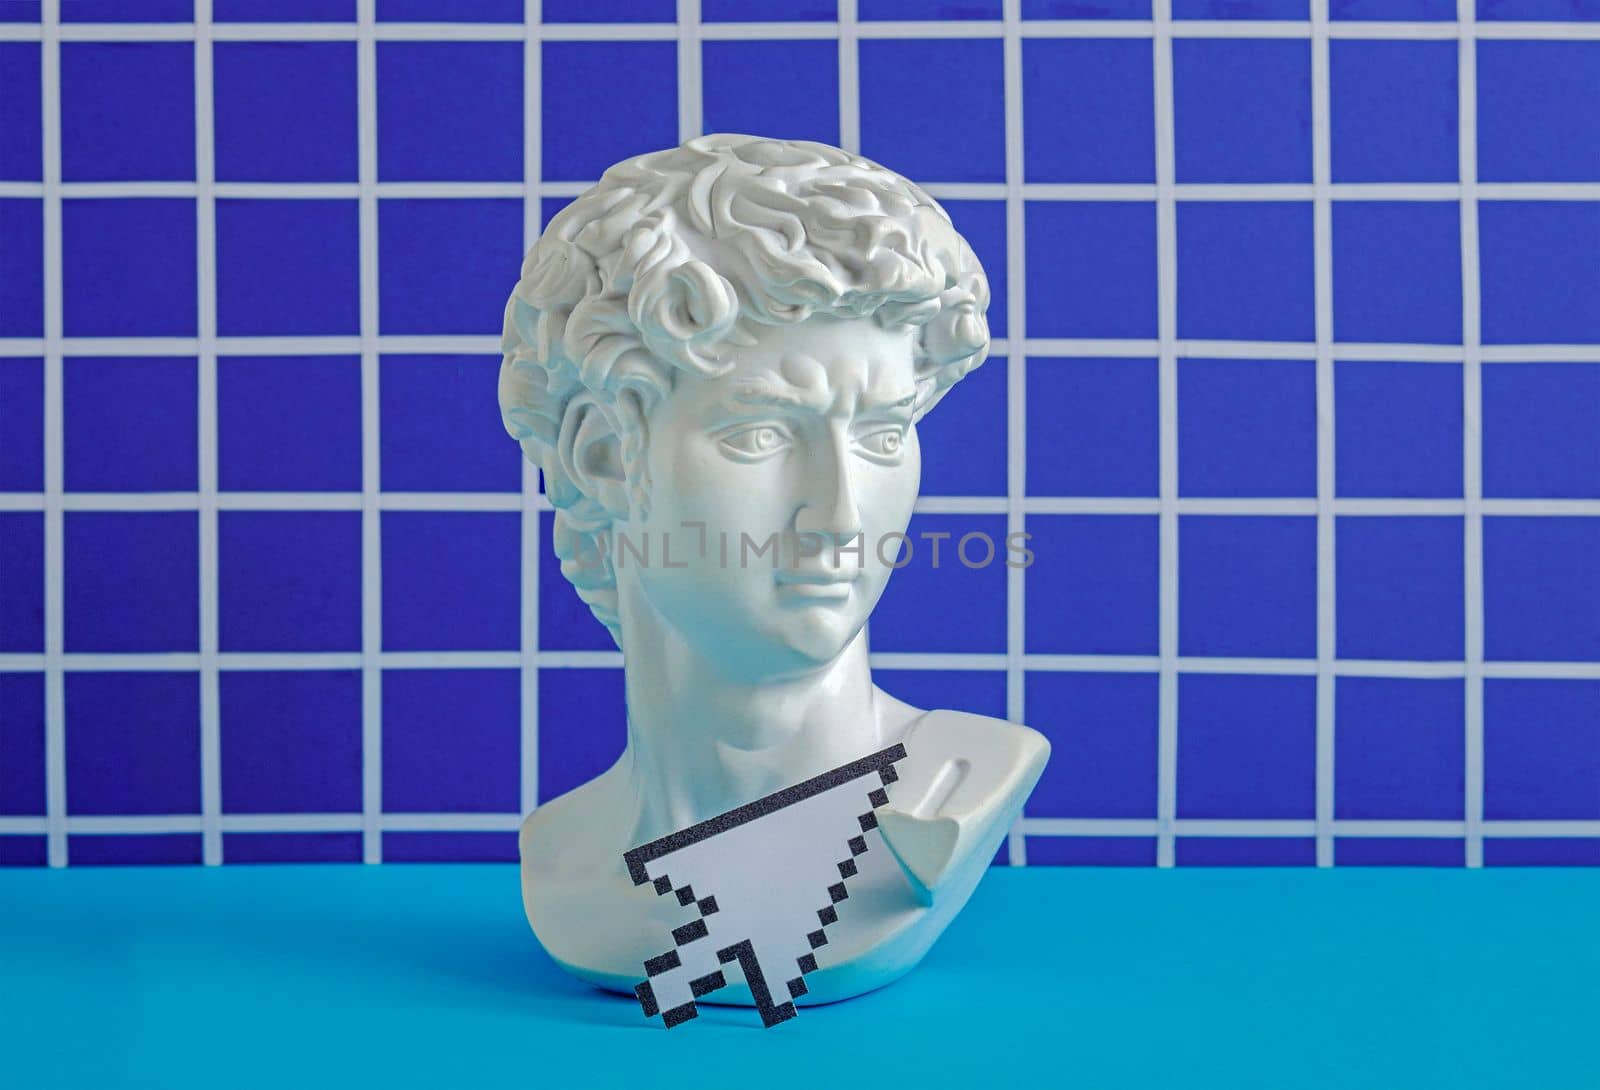 David statue head and arrow pixel mouse pointer interface. Minimal concept of NFT technologies of the future cyberpunk and vaporwave crypto technologies by sergii_gnatiuk